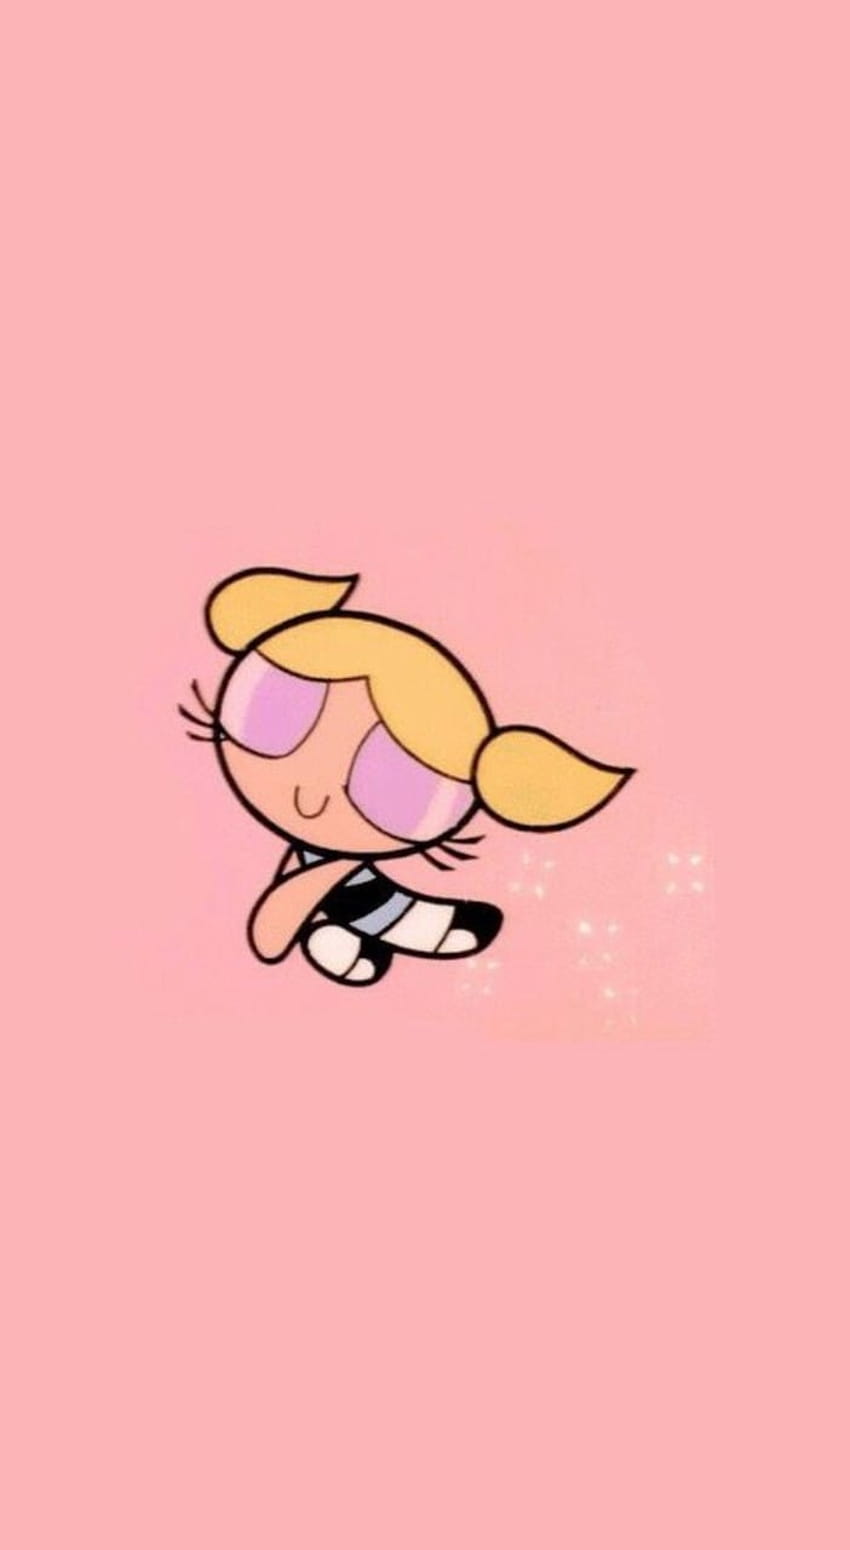 It's a cute of Bubbles from PowerPuff Girls in an aesthetic, aesthetic girl HD phone wallpaper